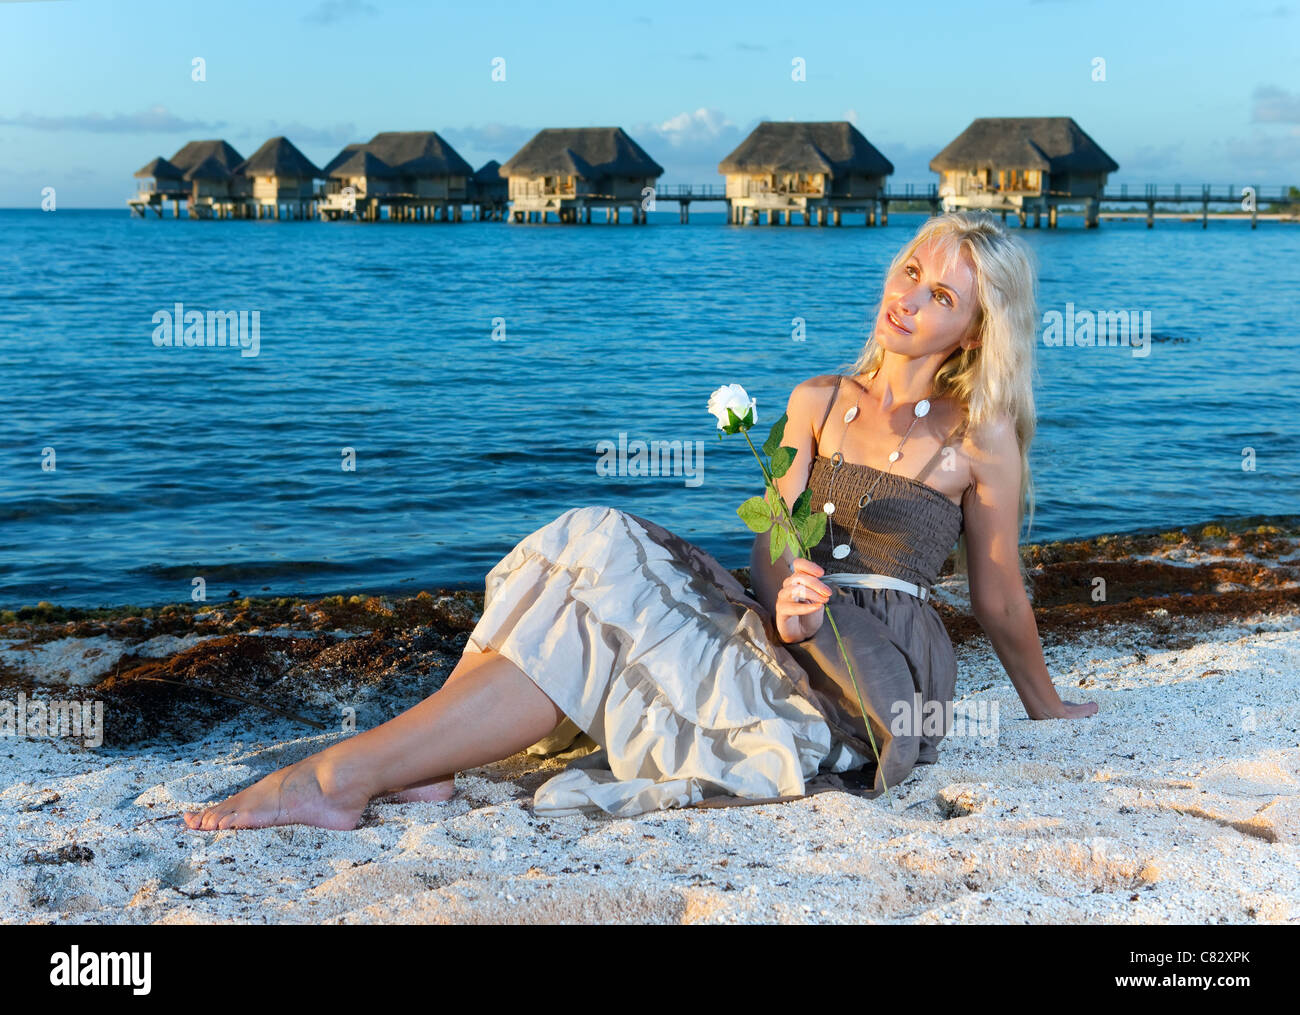 The young woman in a long sundress on a tropical beach. Stock Photo